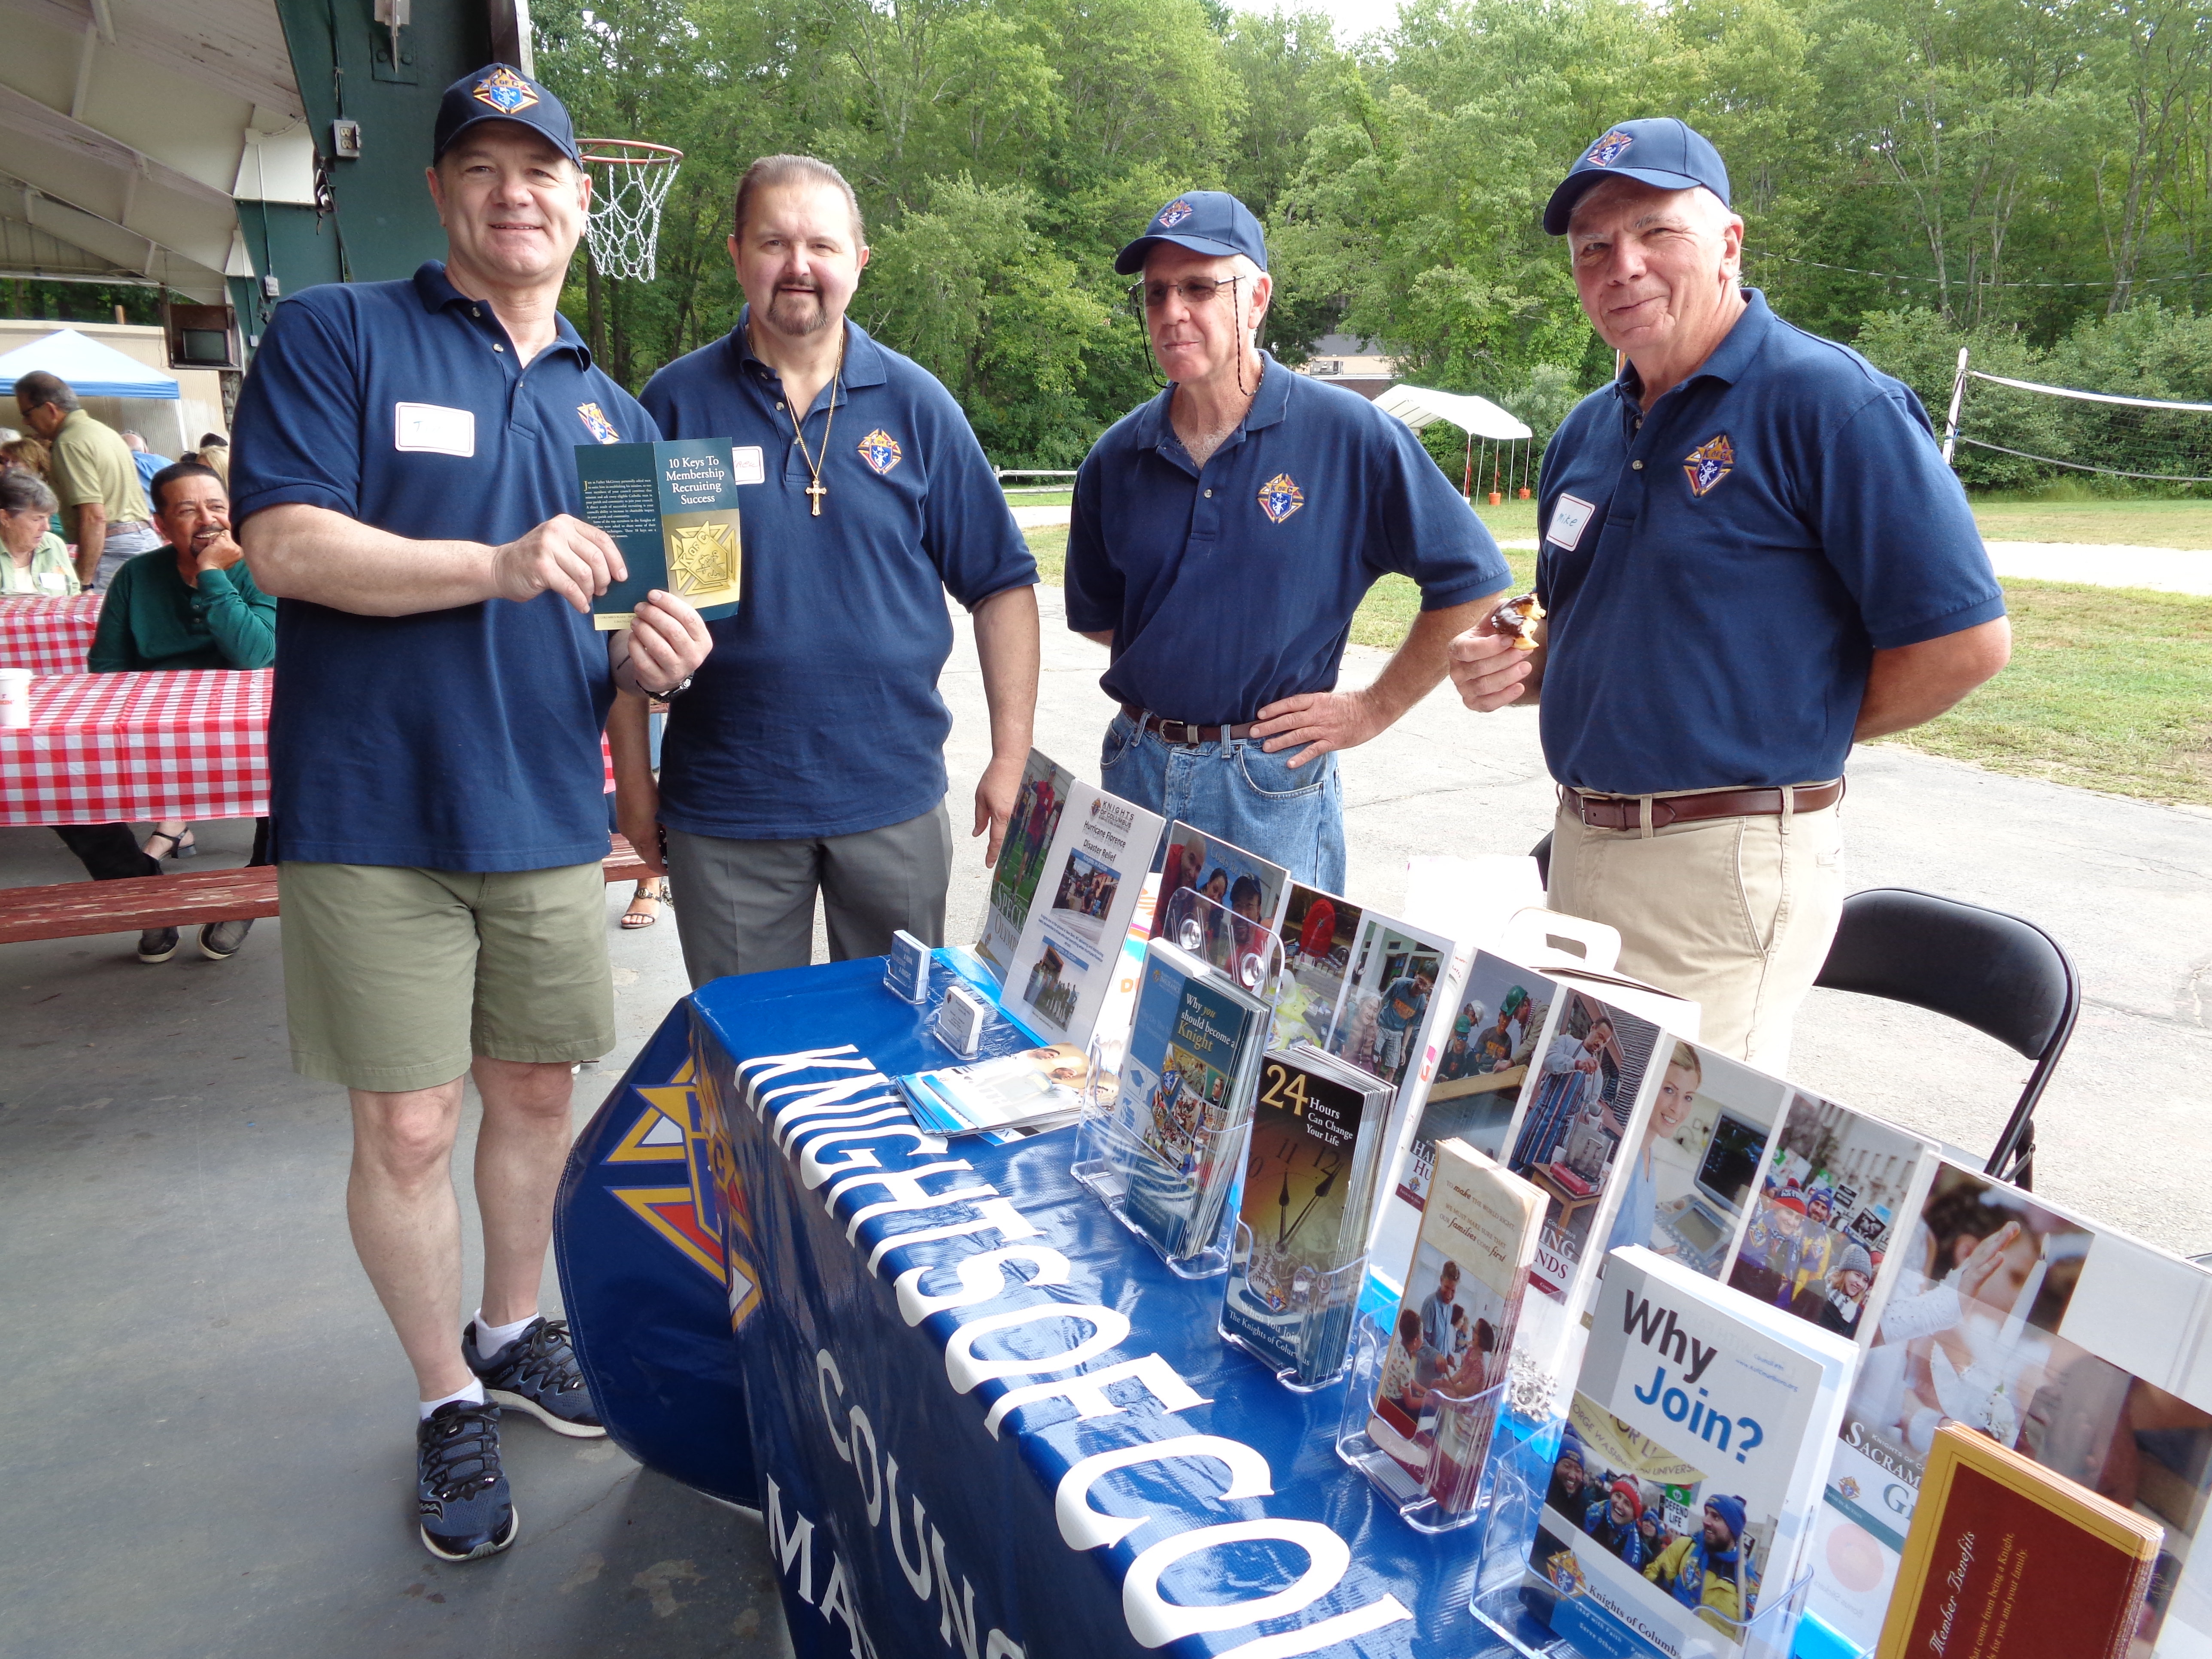 Tim Guttner, Andy Tivnan, Mike Cahill and Mike Wells staffing the KofC Table at the Ministry Exposition